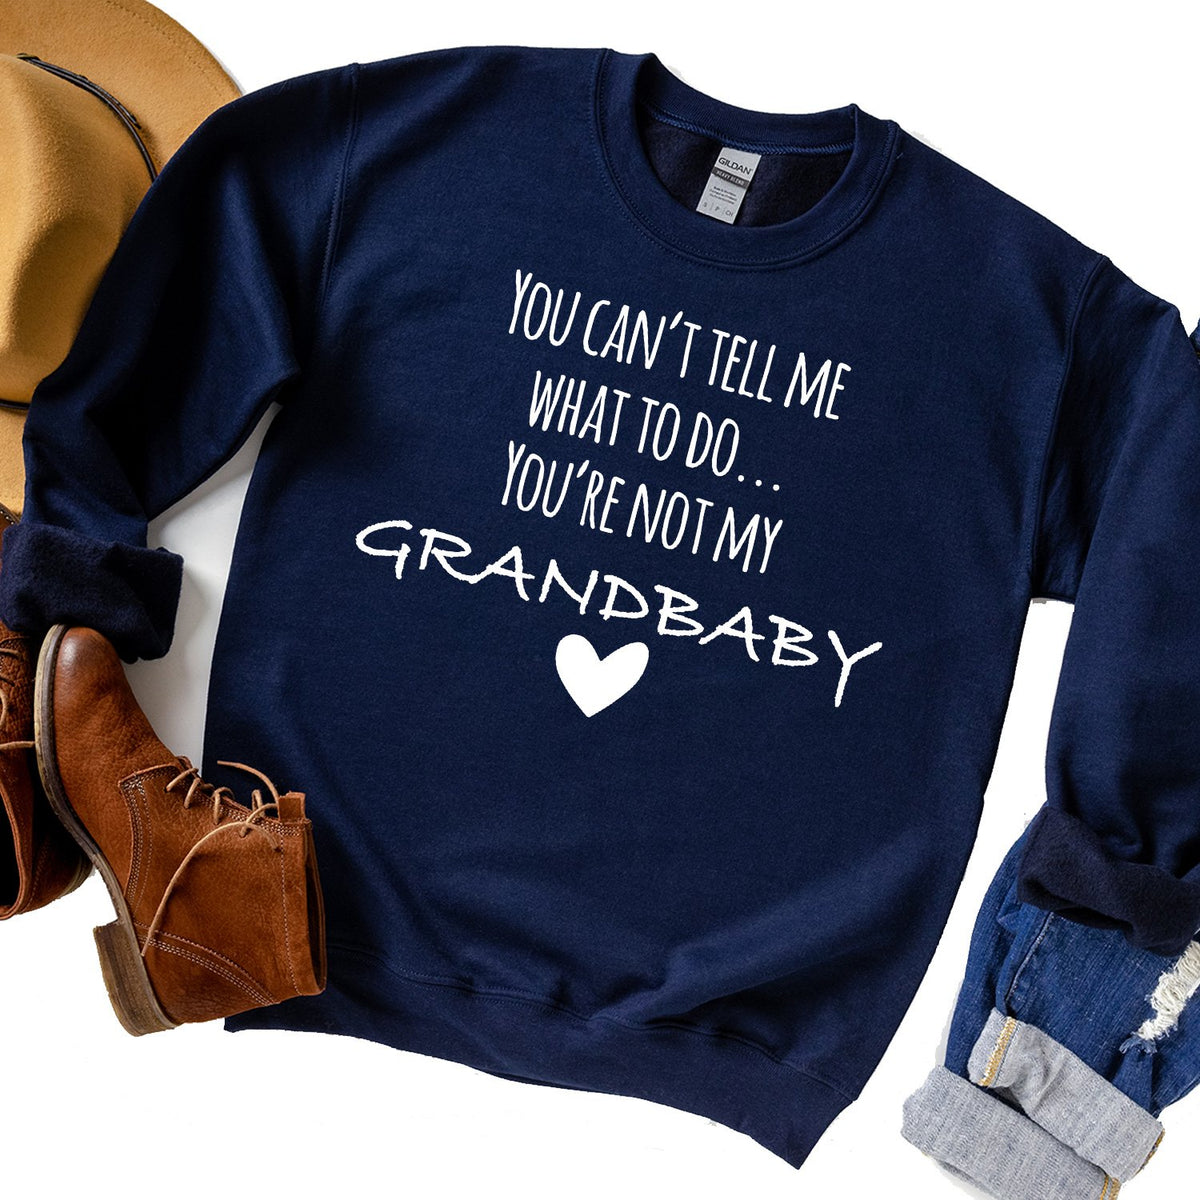 You Can&#39;t Tell Me What To Do You&#39;re Not My Grandbaby - Long Sleeve Heavy Crewneck Sweatshirt